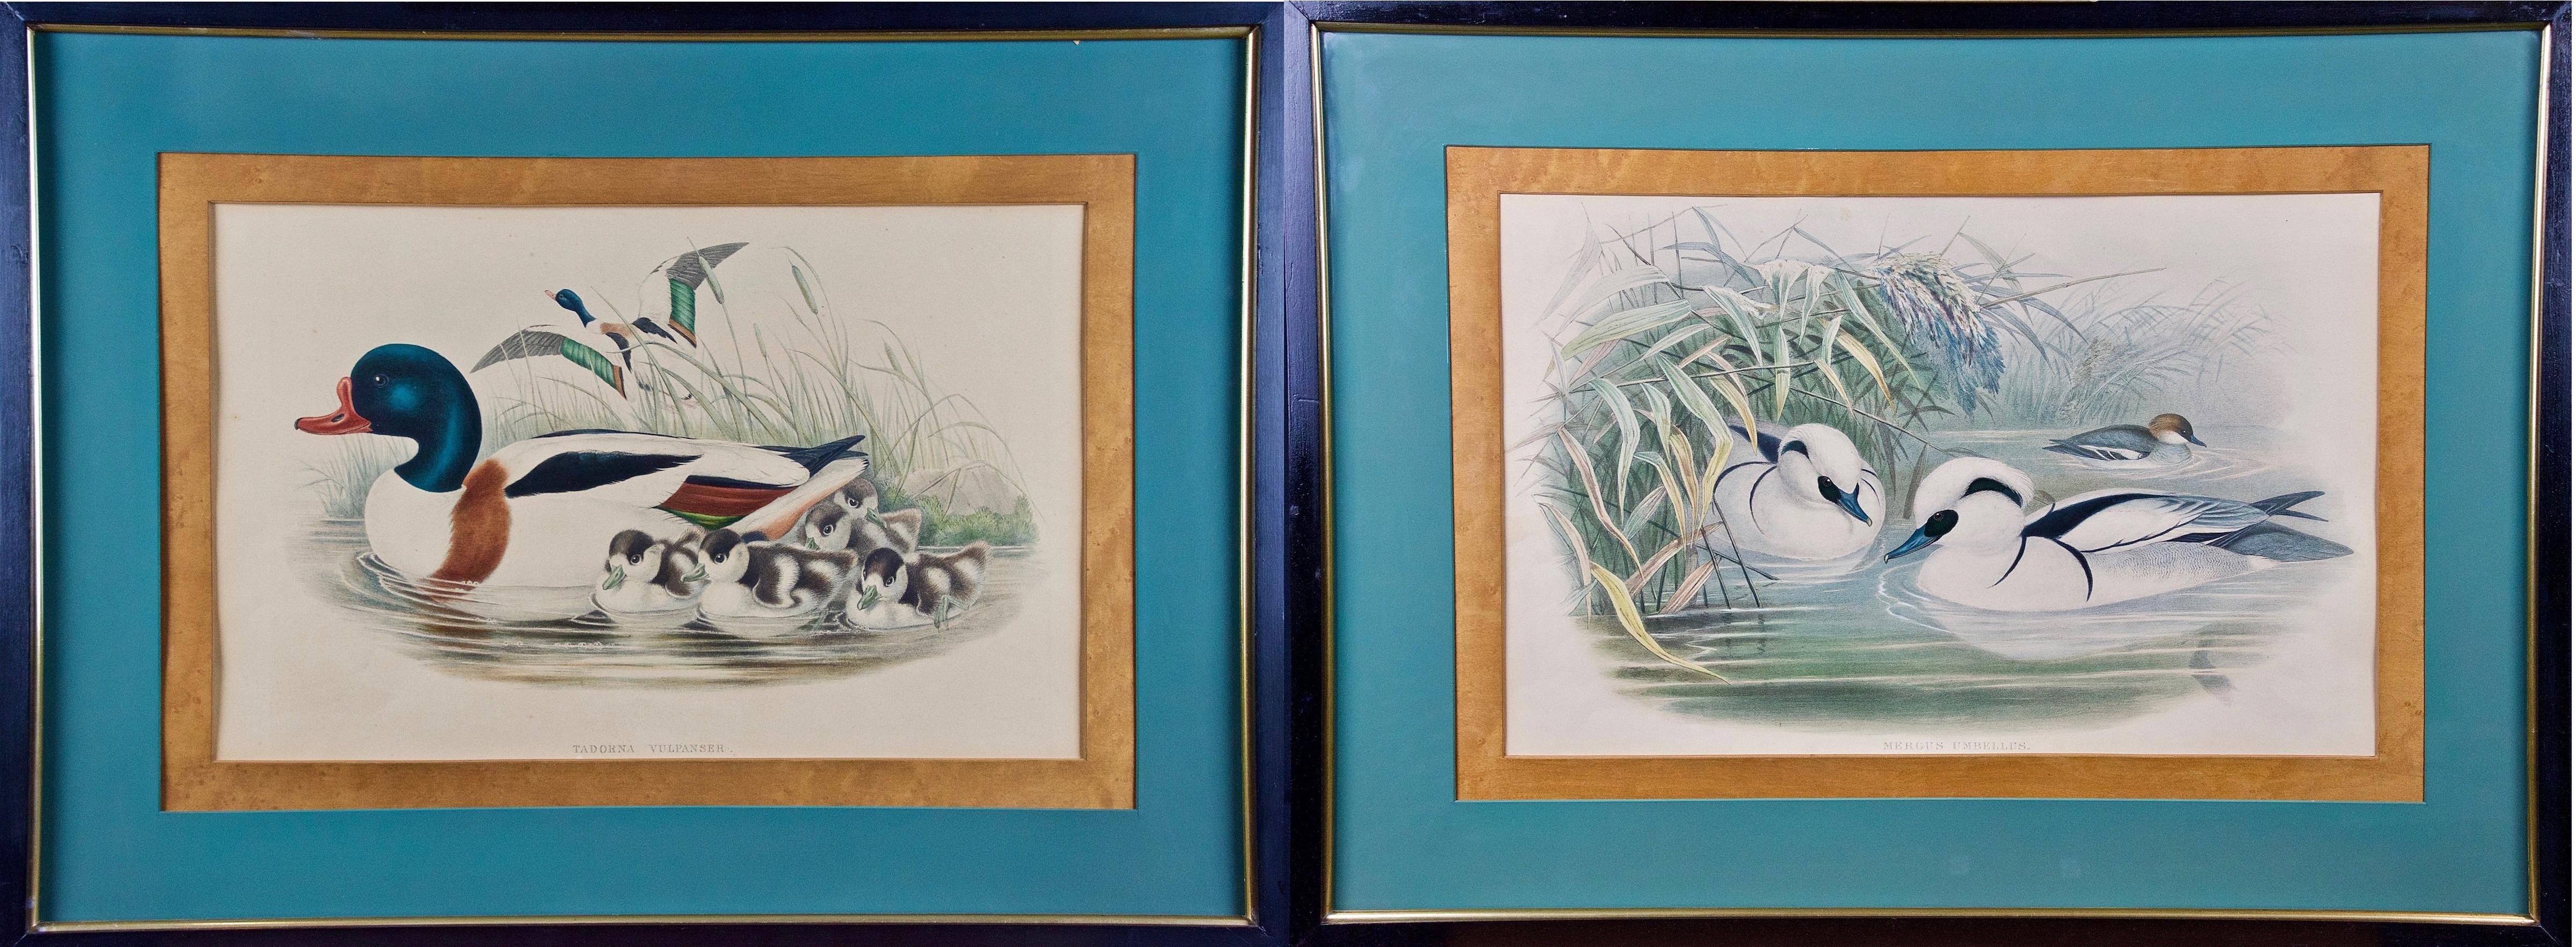 Pair of 19th C. Hand-colored Lithographs of Ducks by John Gould